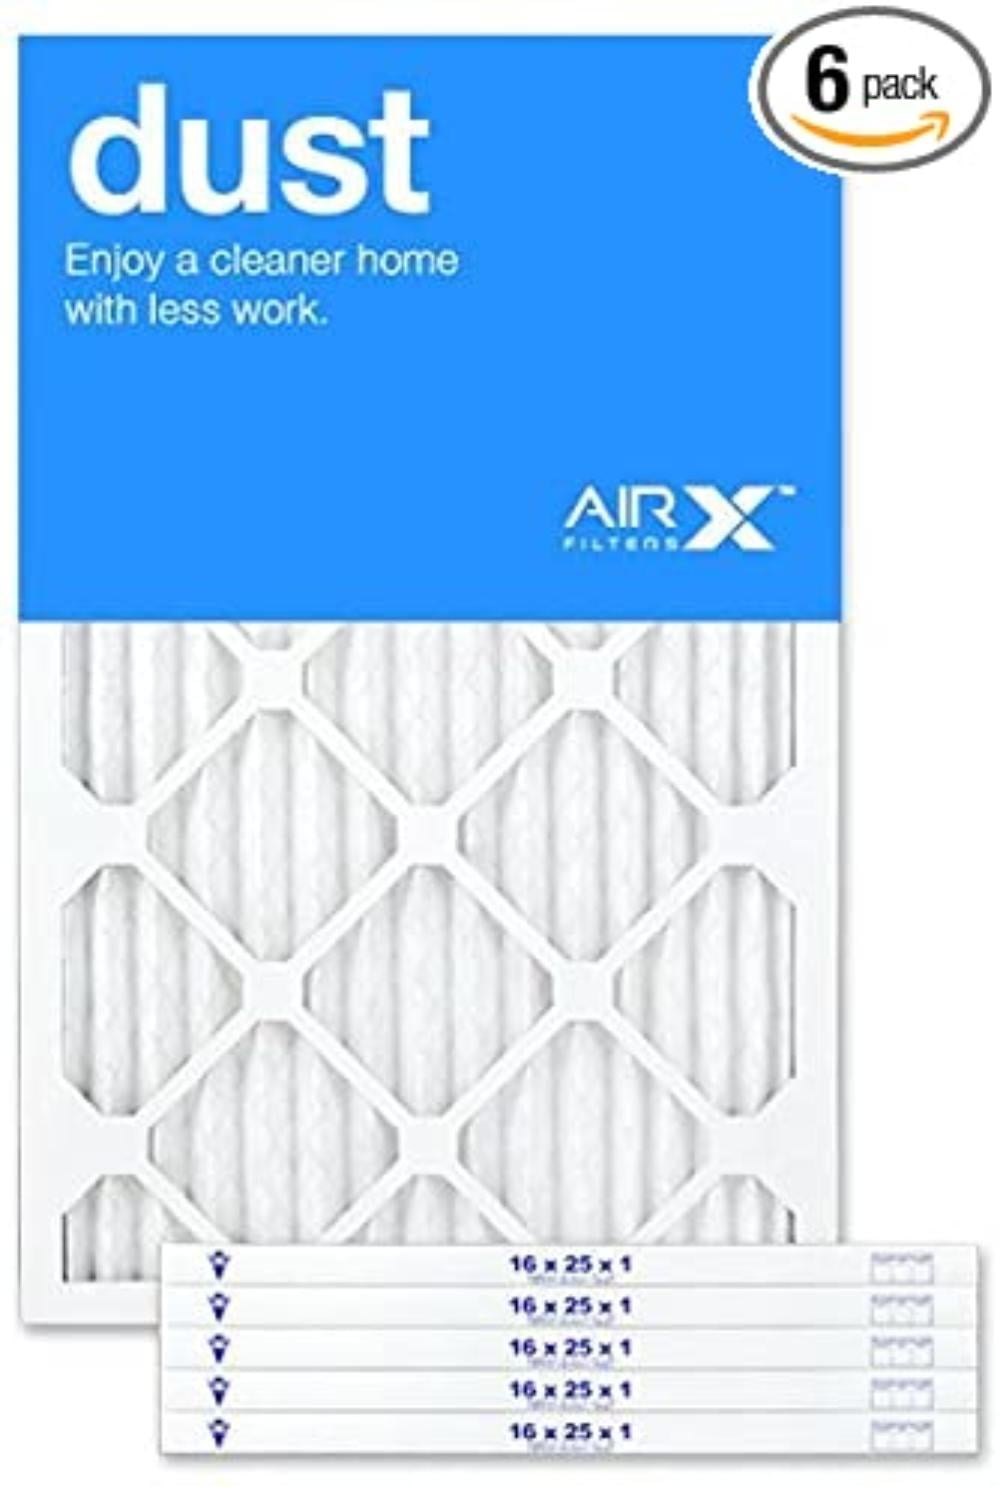 6-Pk AIRx Filters Dust 15x25x1 Air Filter Replacement Pleated MERV 8 